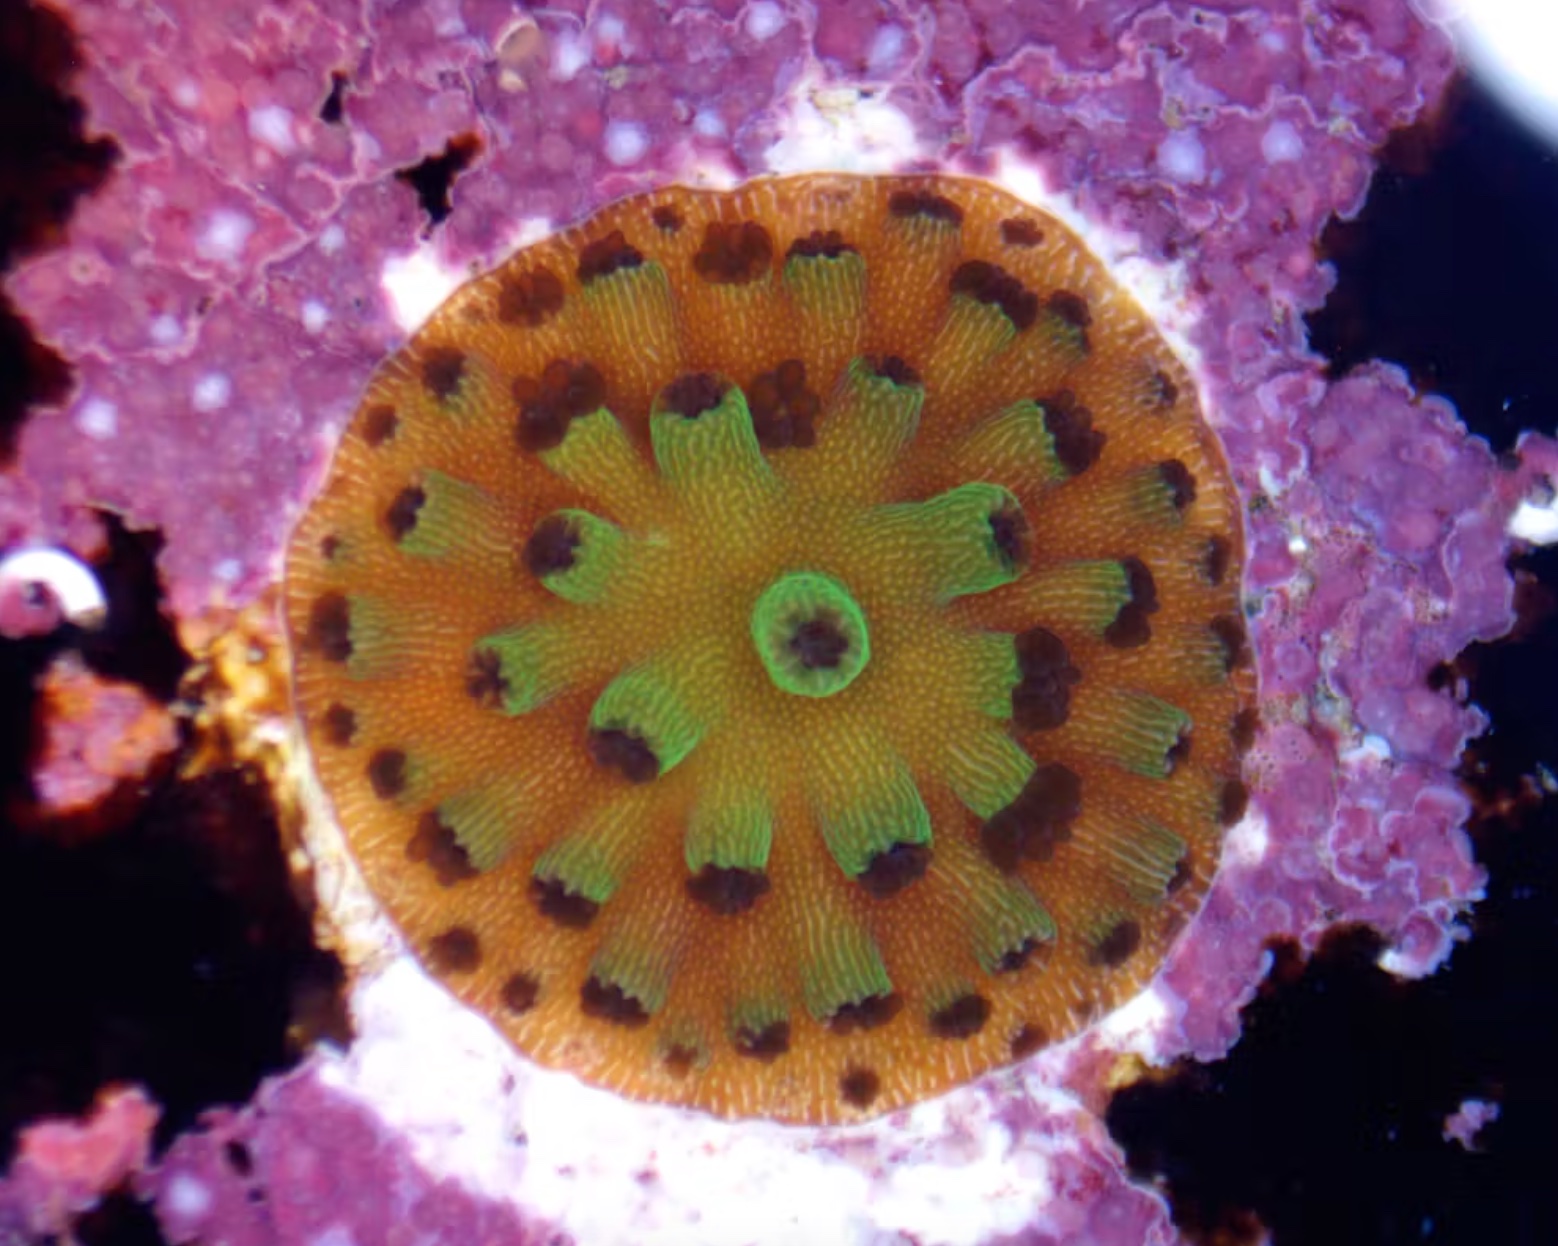 Close-up of an orange and green sea anemone on a coral surface.